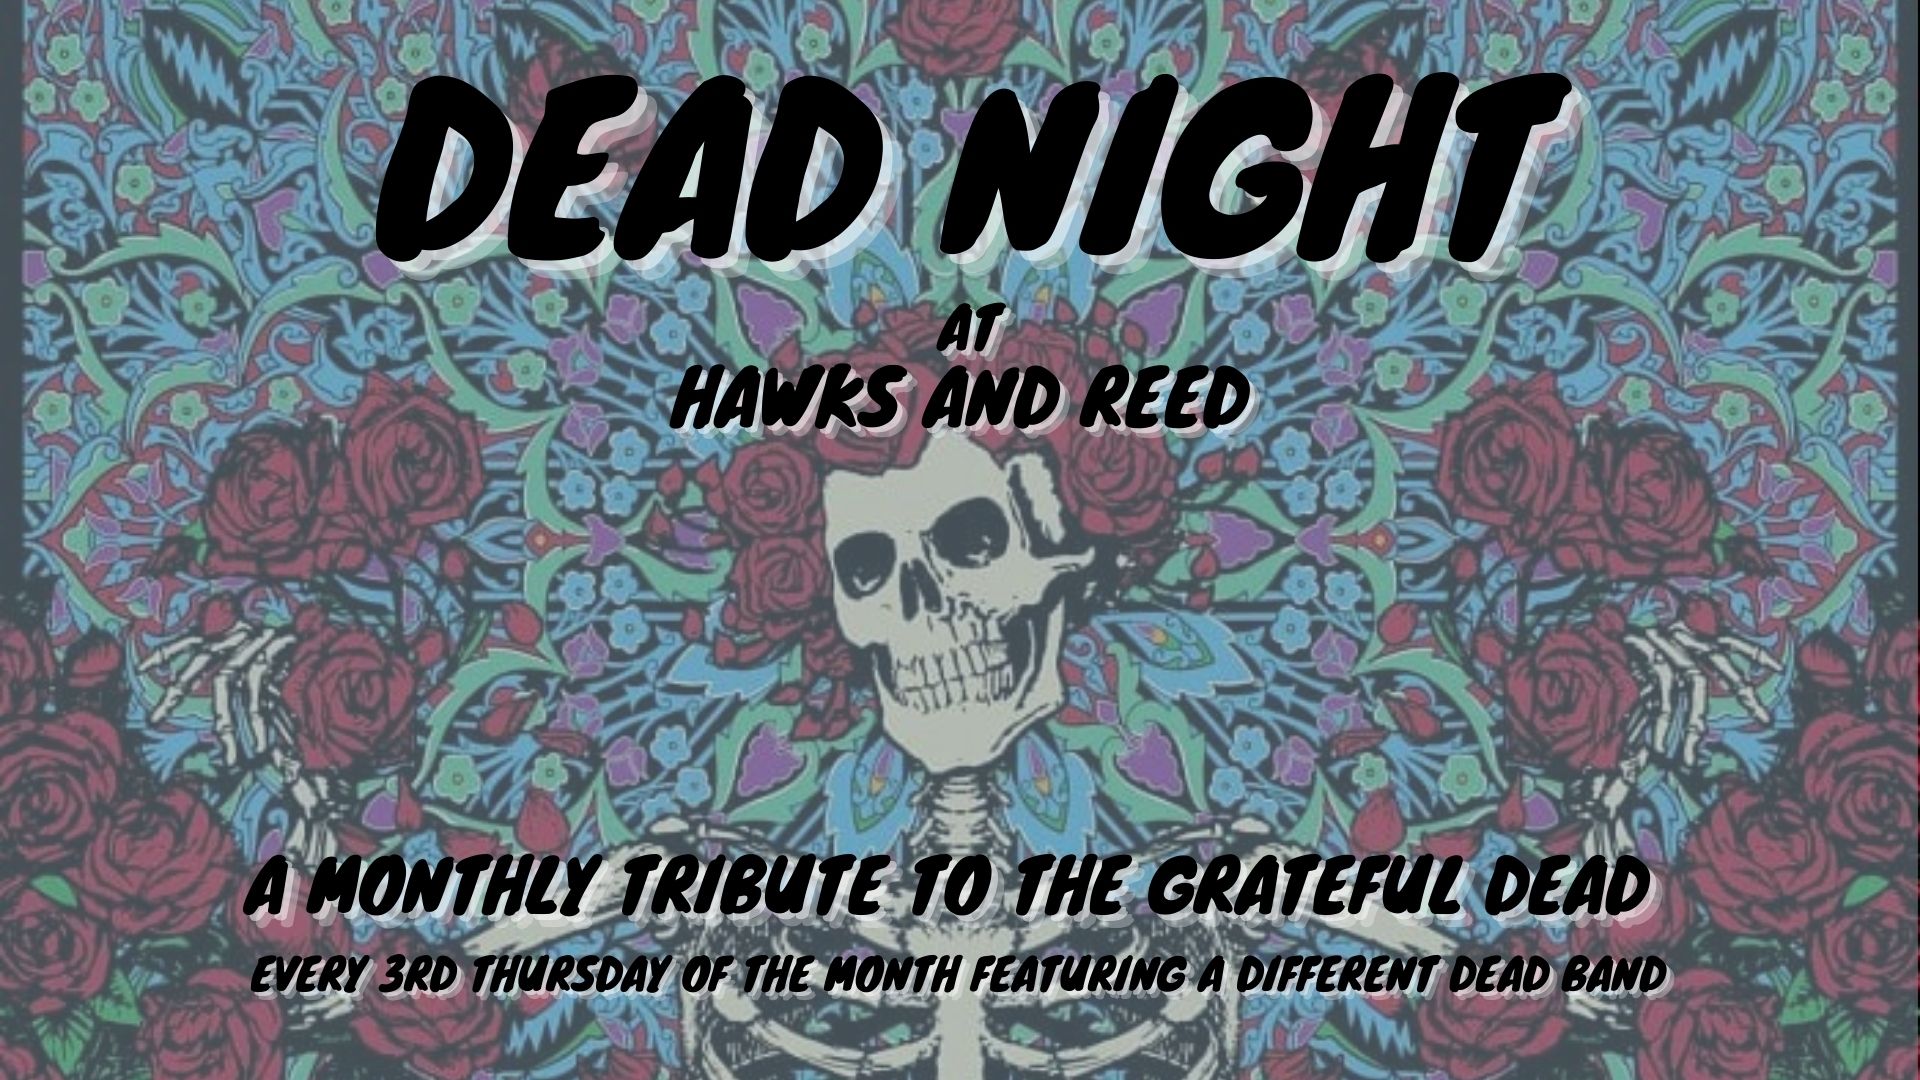 DEAD NIGHT AT HAWKS AND REED – ZACK NUGENT BAND